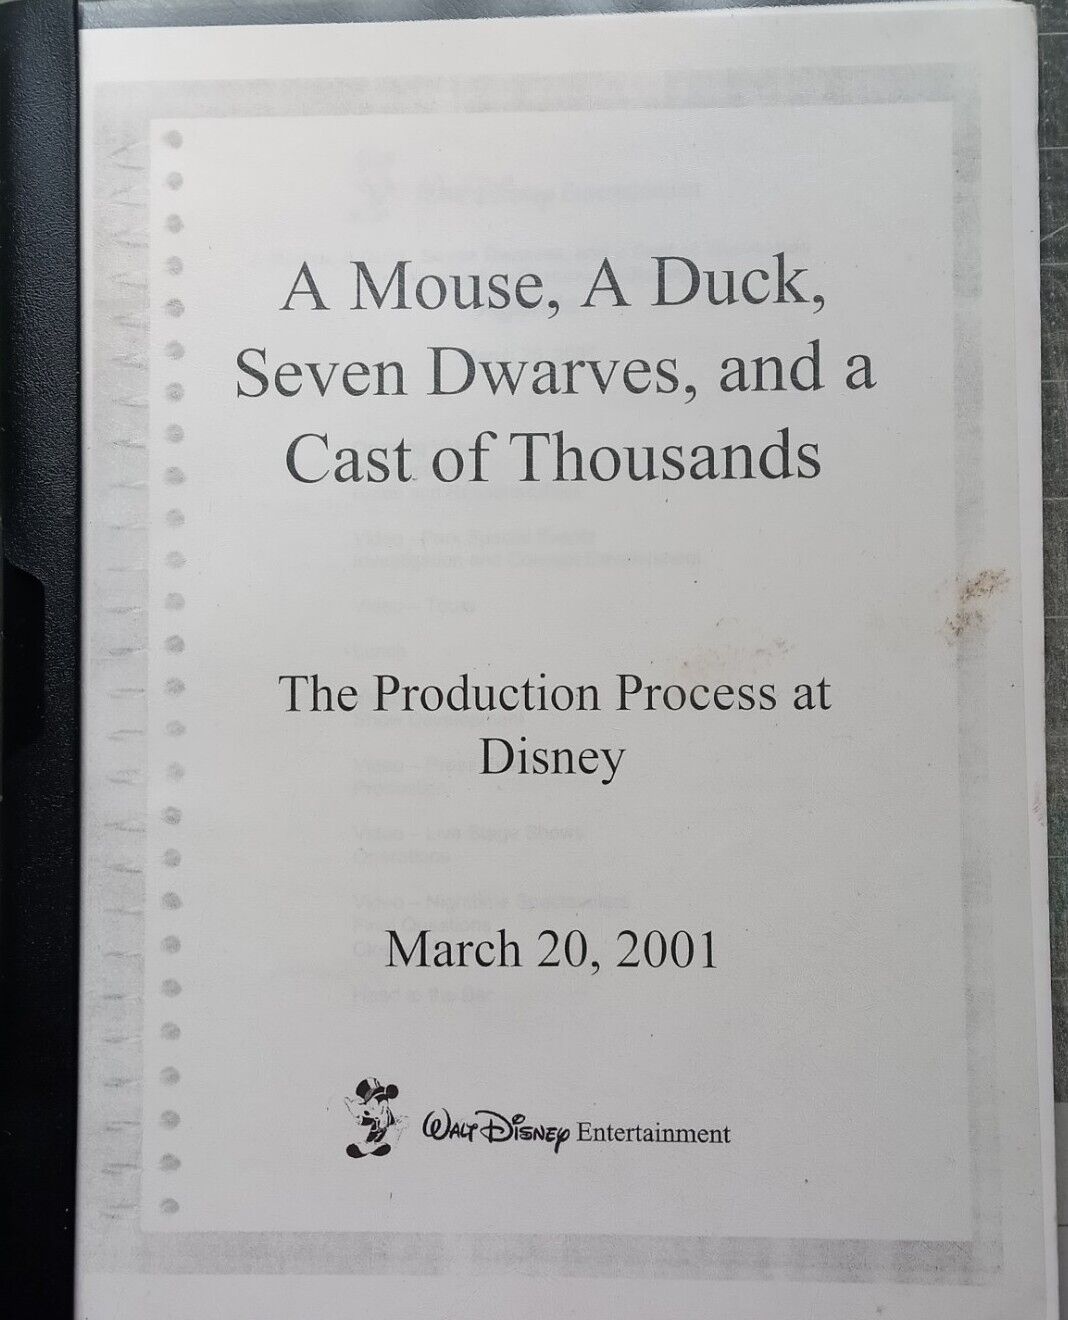 A Mouse, A Duck, Seven Dwarves, and a Cast of Thousands #Disney conference  2001